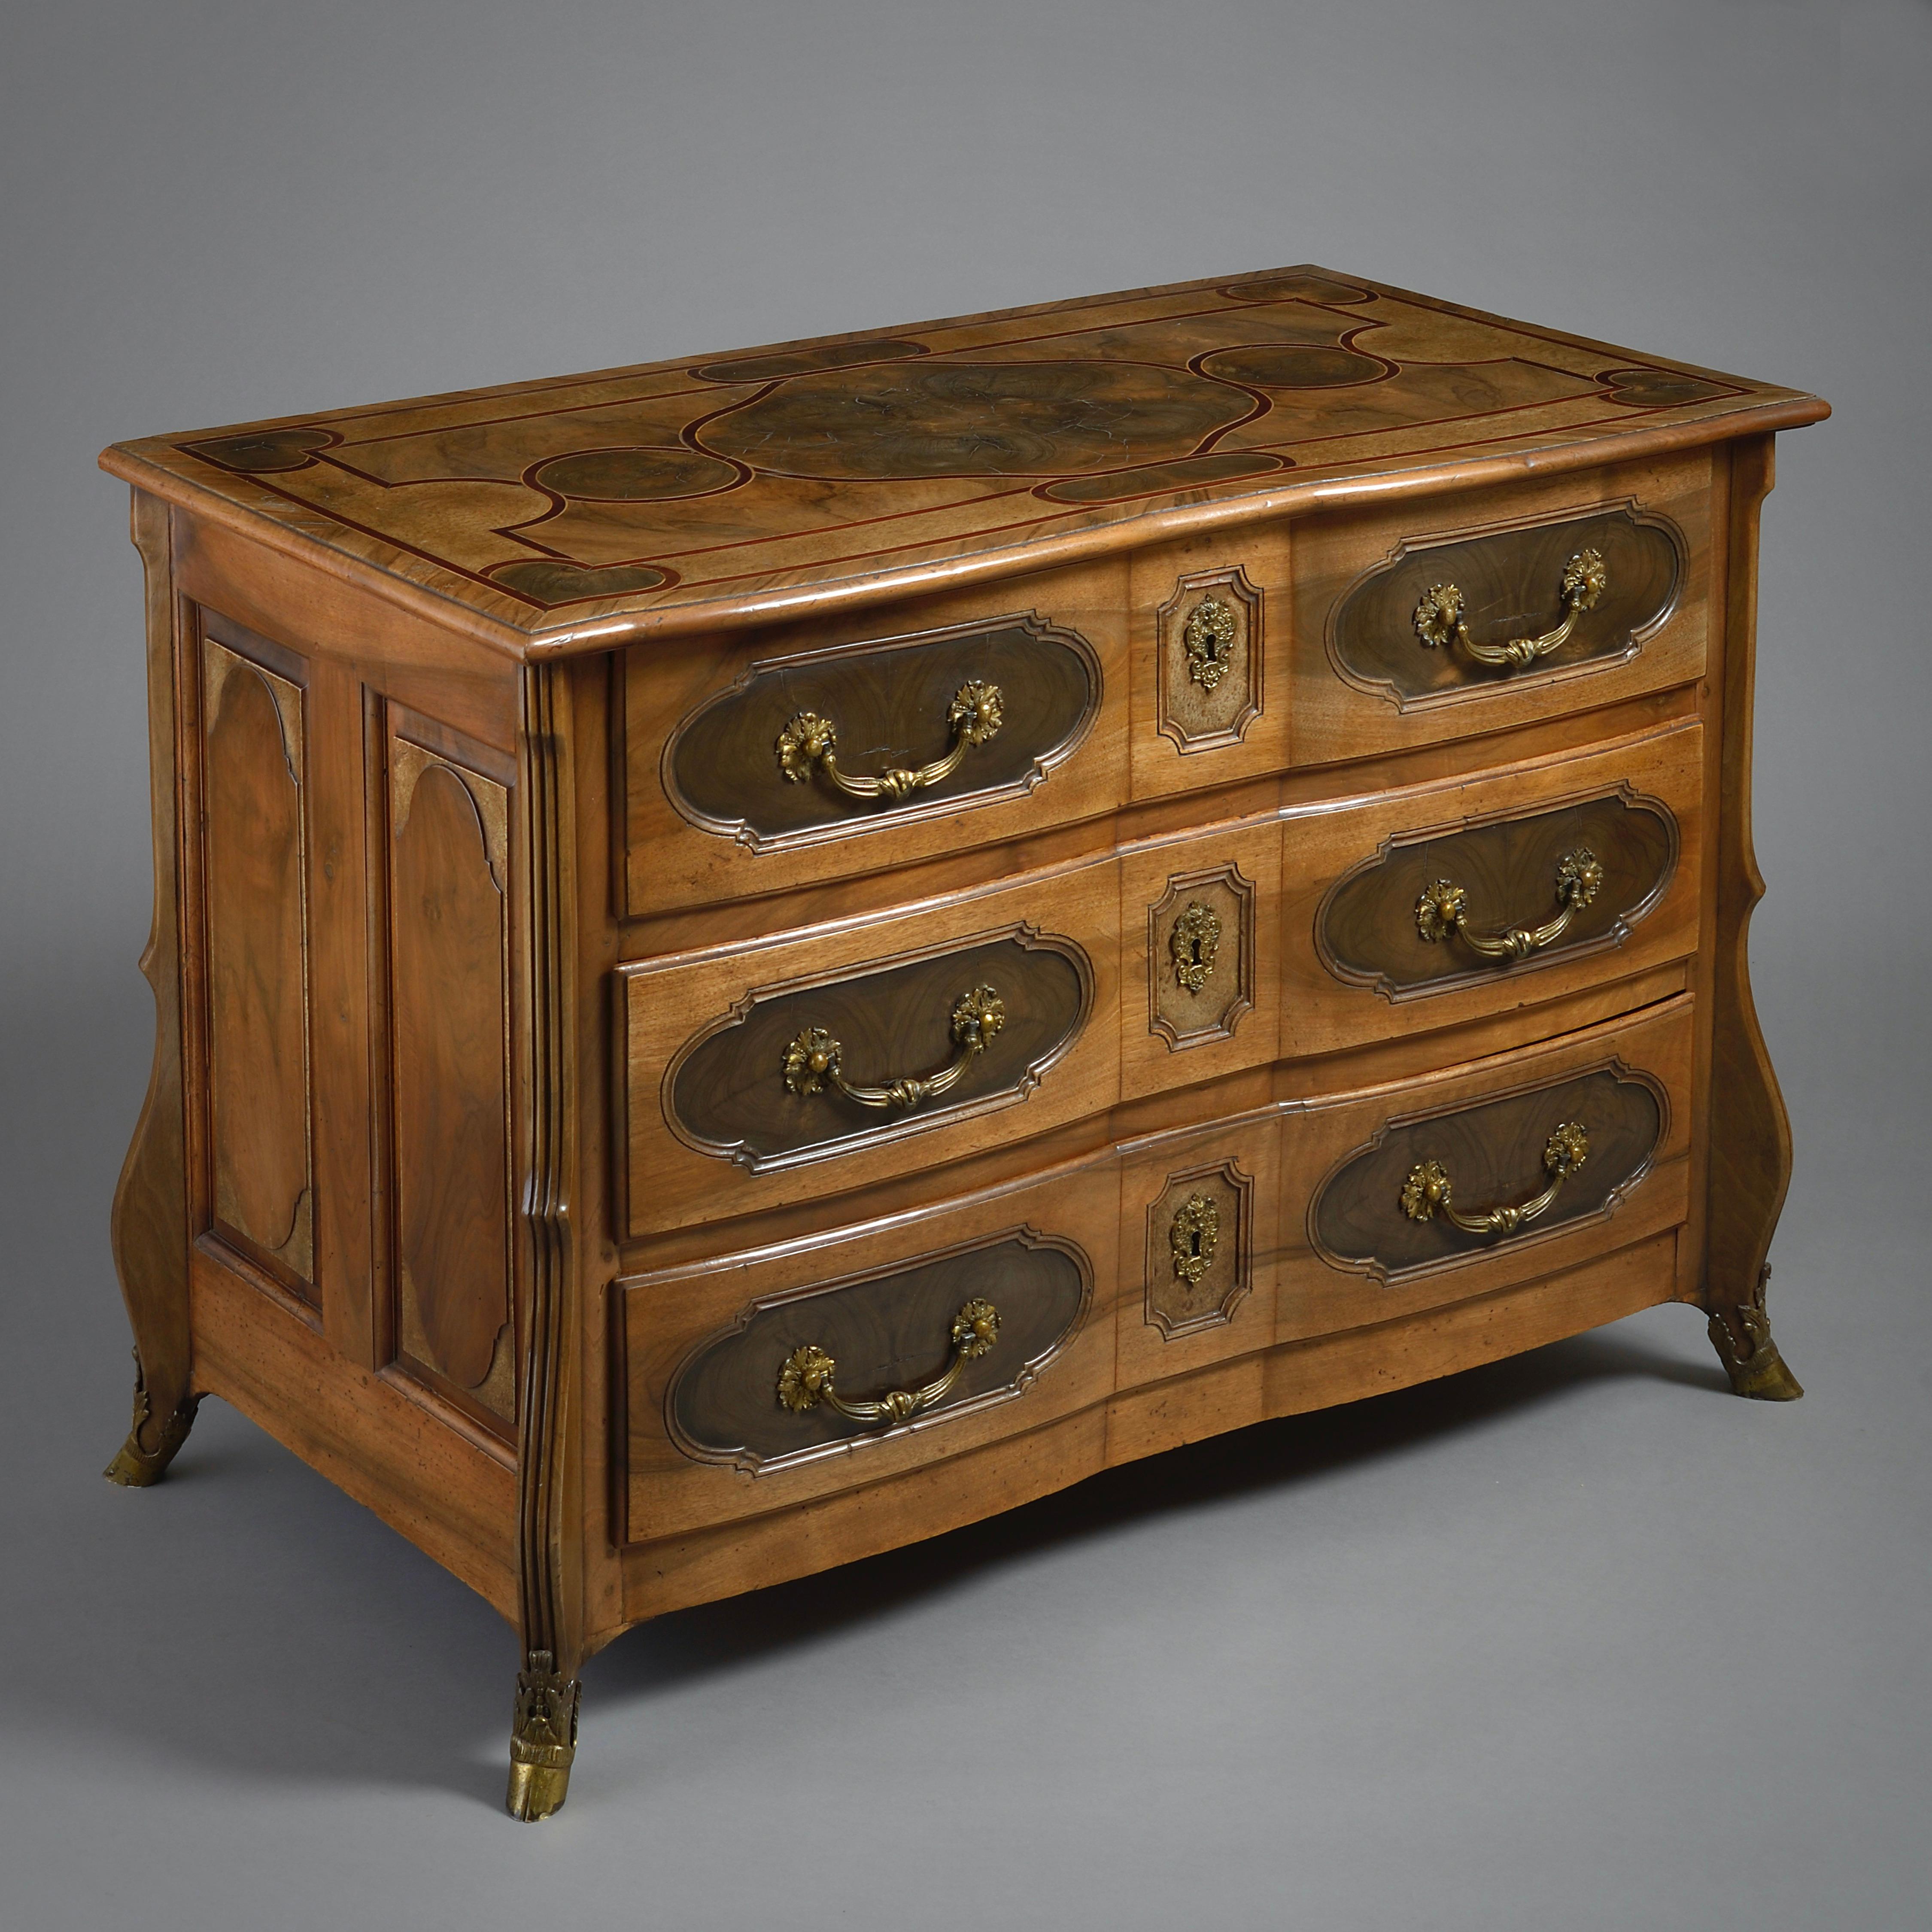 A Régence walnut, end-cut olive wood and burr-ash commode by Thomas Hache, Grenoble, circa 1730.